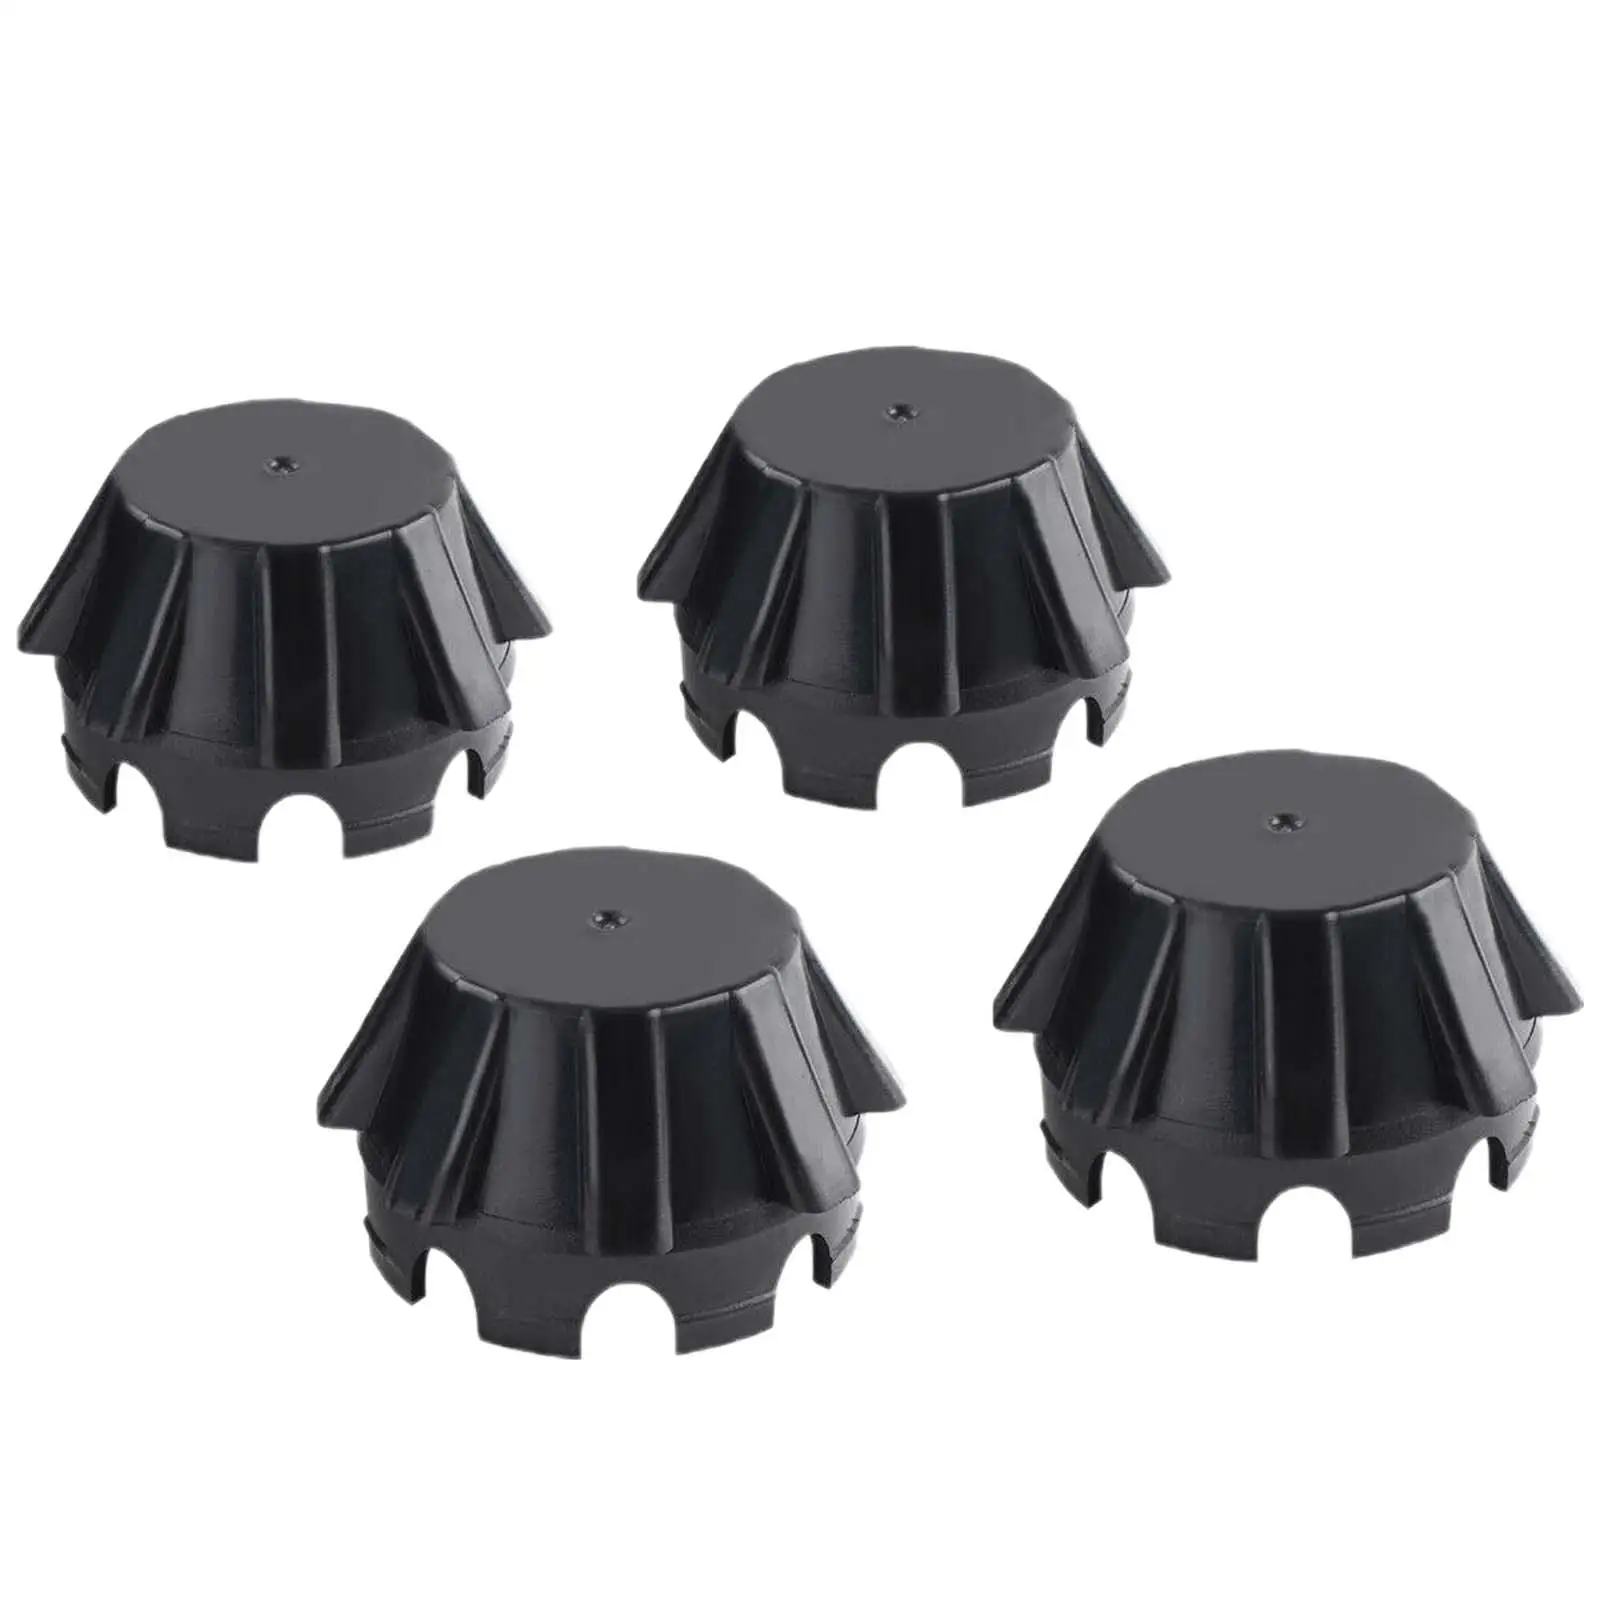 4Pcs Wheel Center Hub Caps 11065-1341 Replaces Accessory for Kawasaki Krx 1000 Easy to Install Quality Sturdy Professional